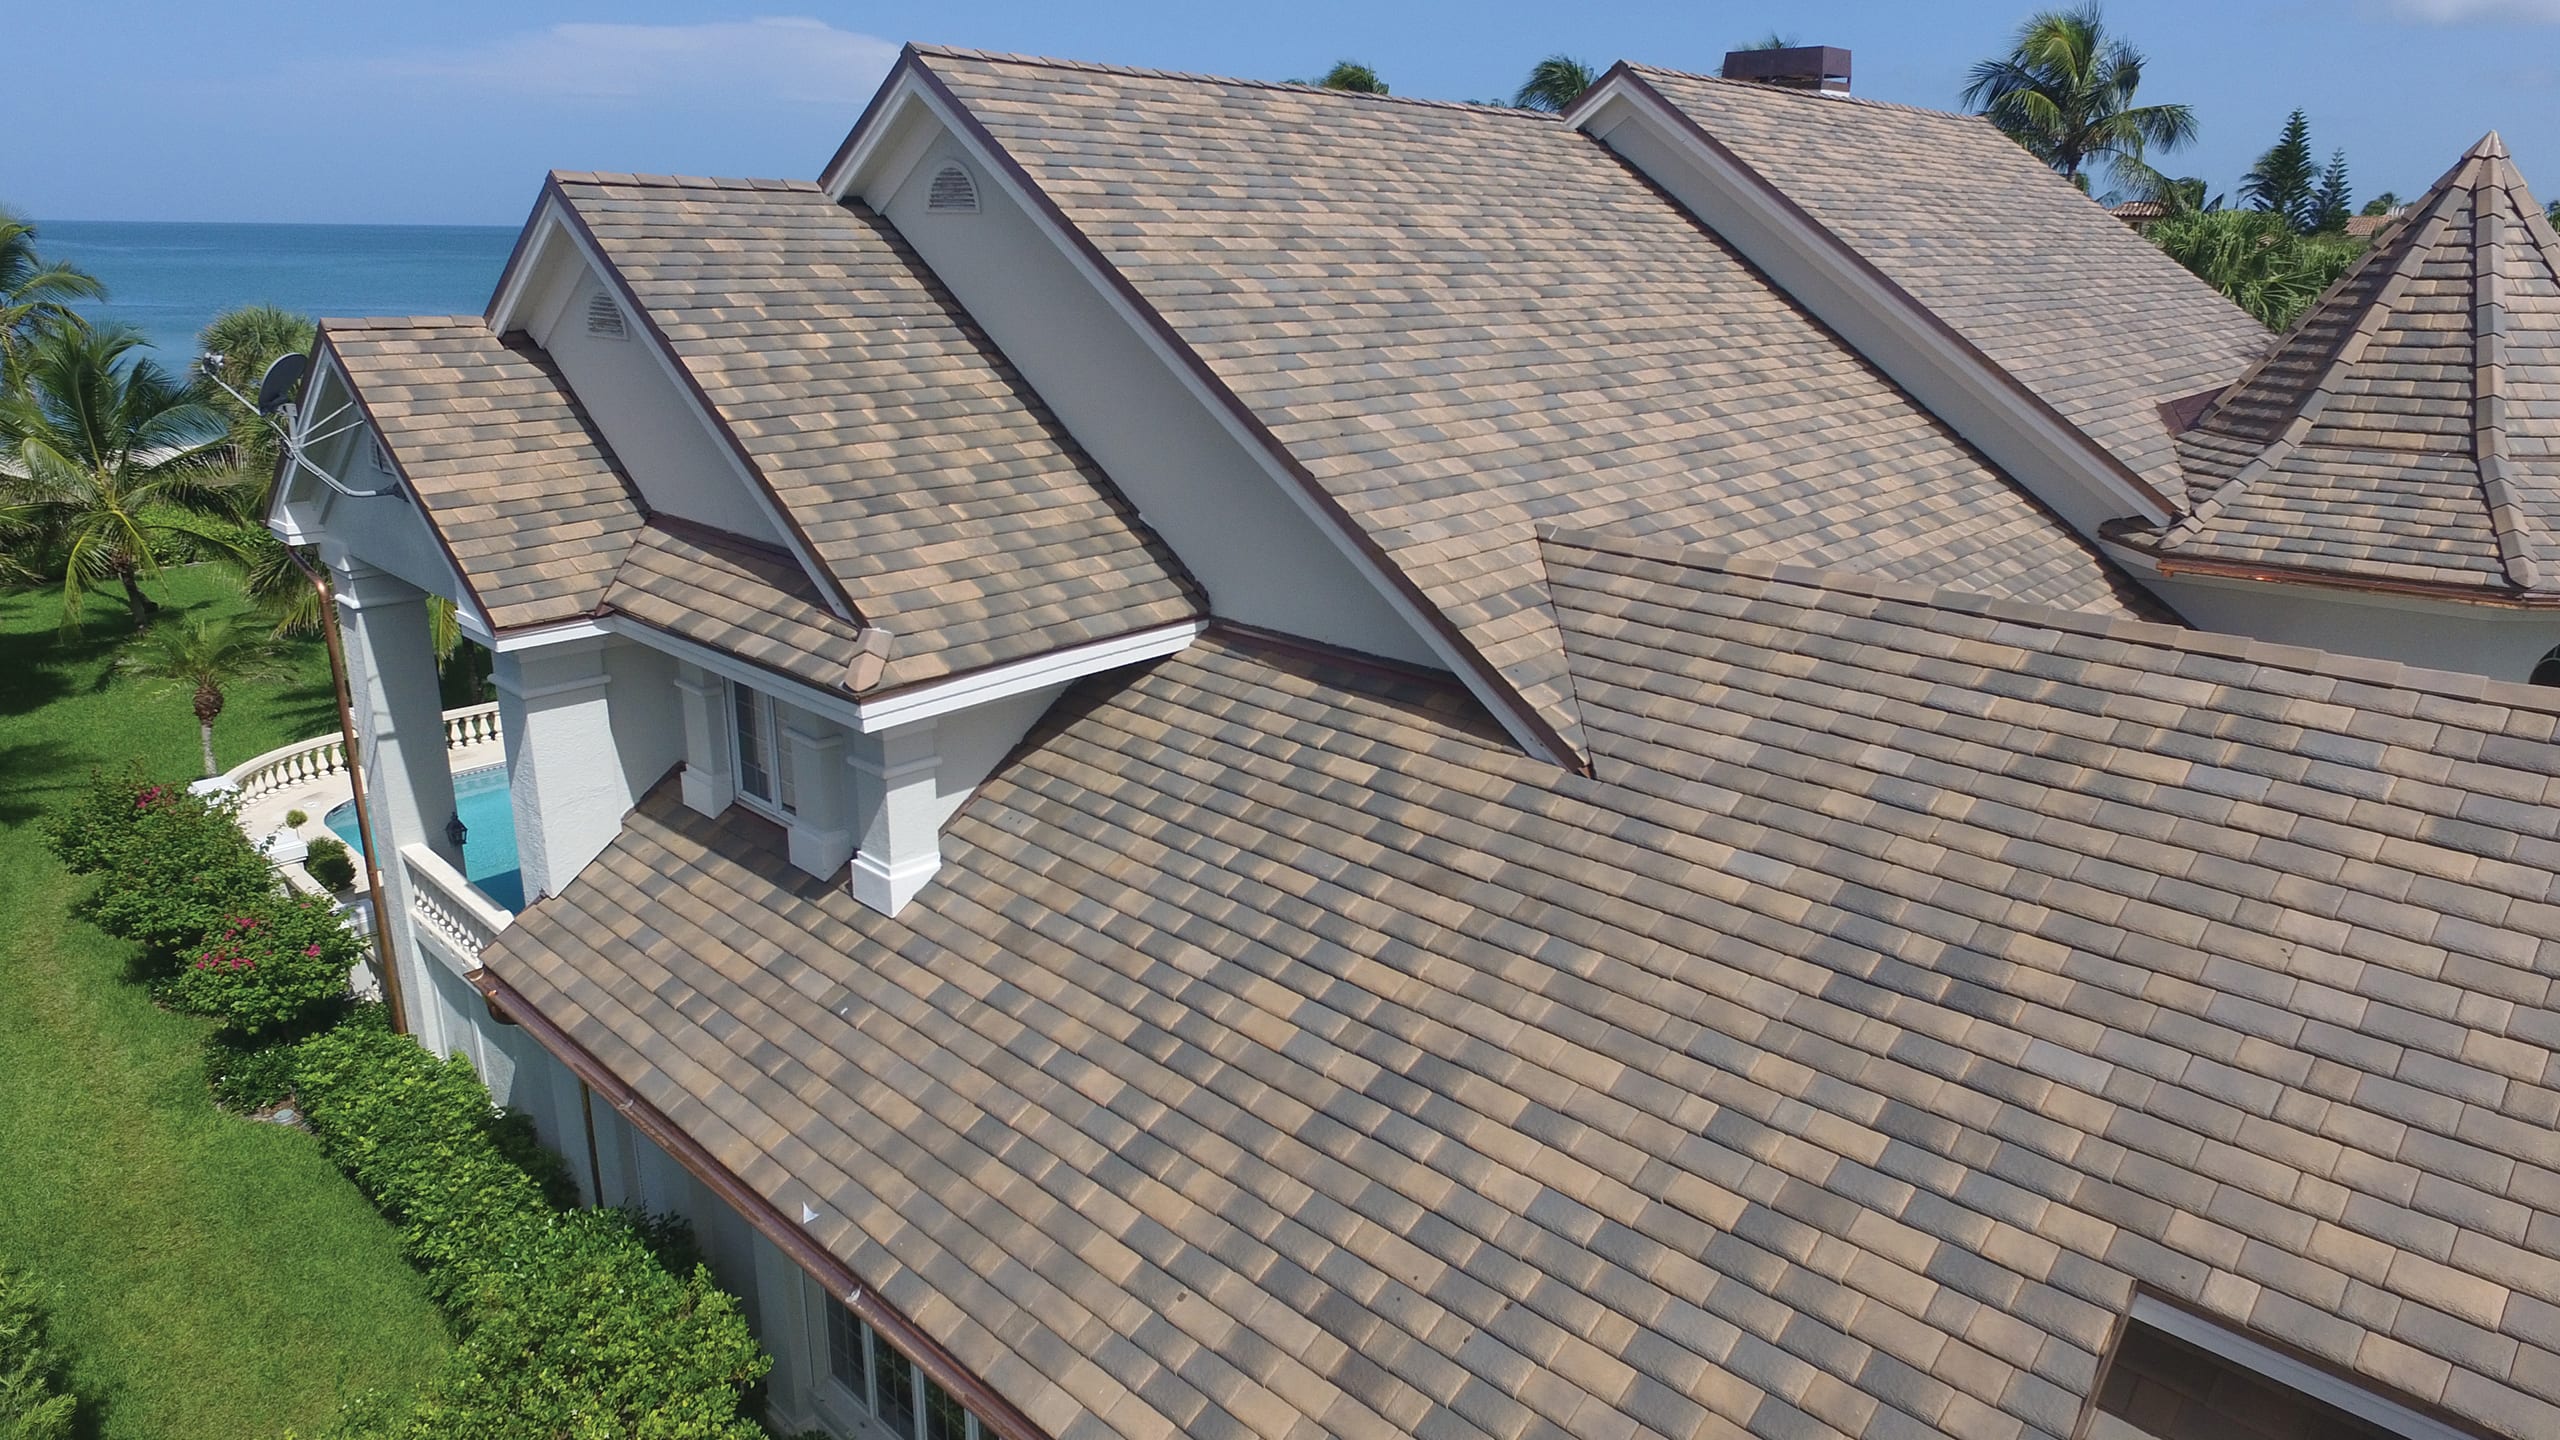 Private Residence - Naples Ludowici Roof Tile